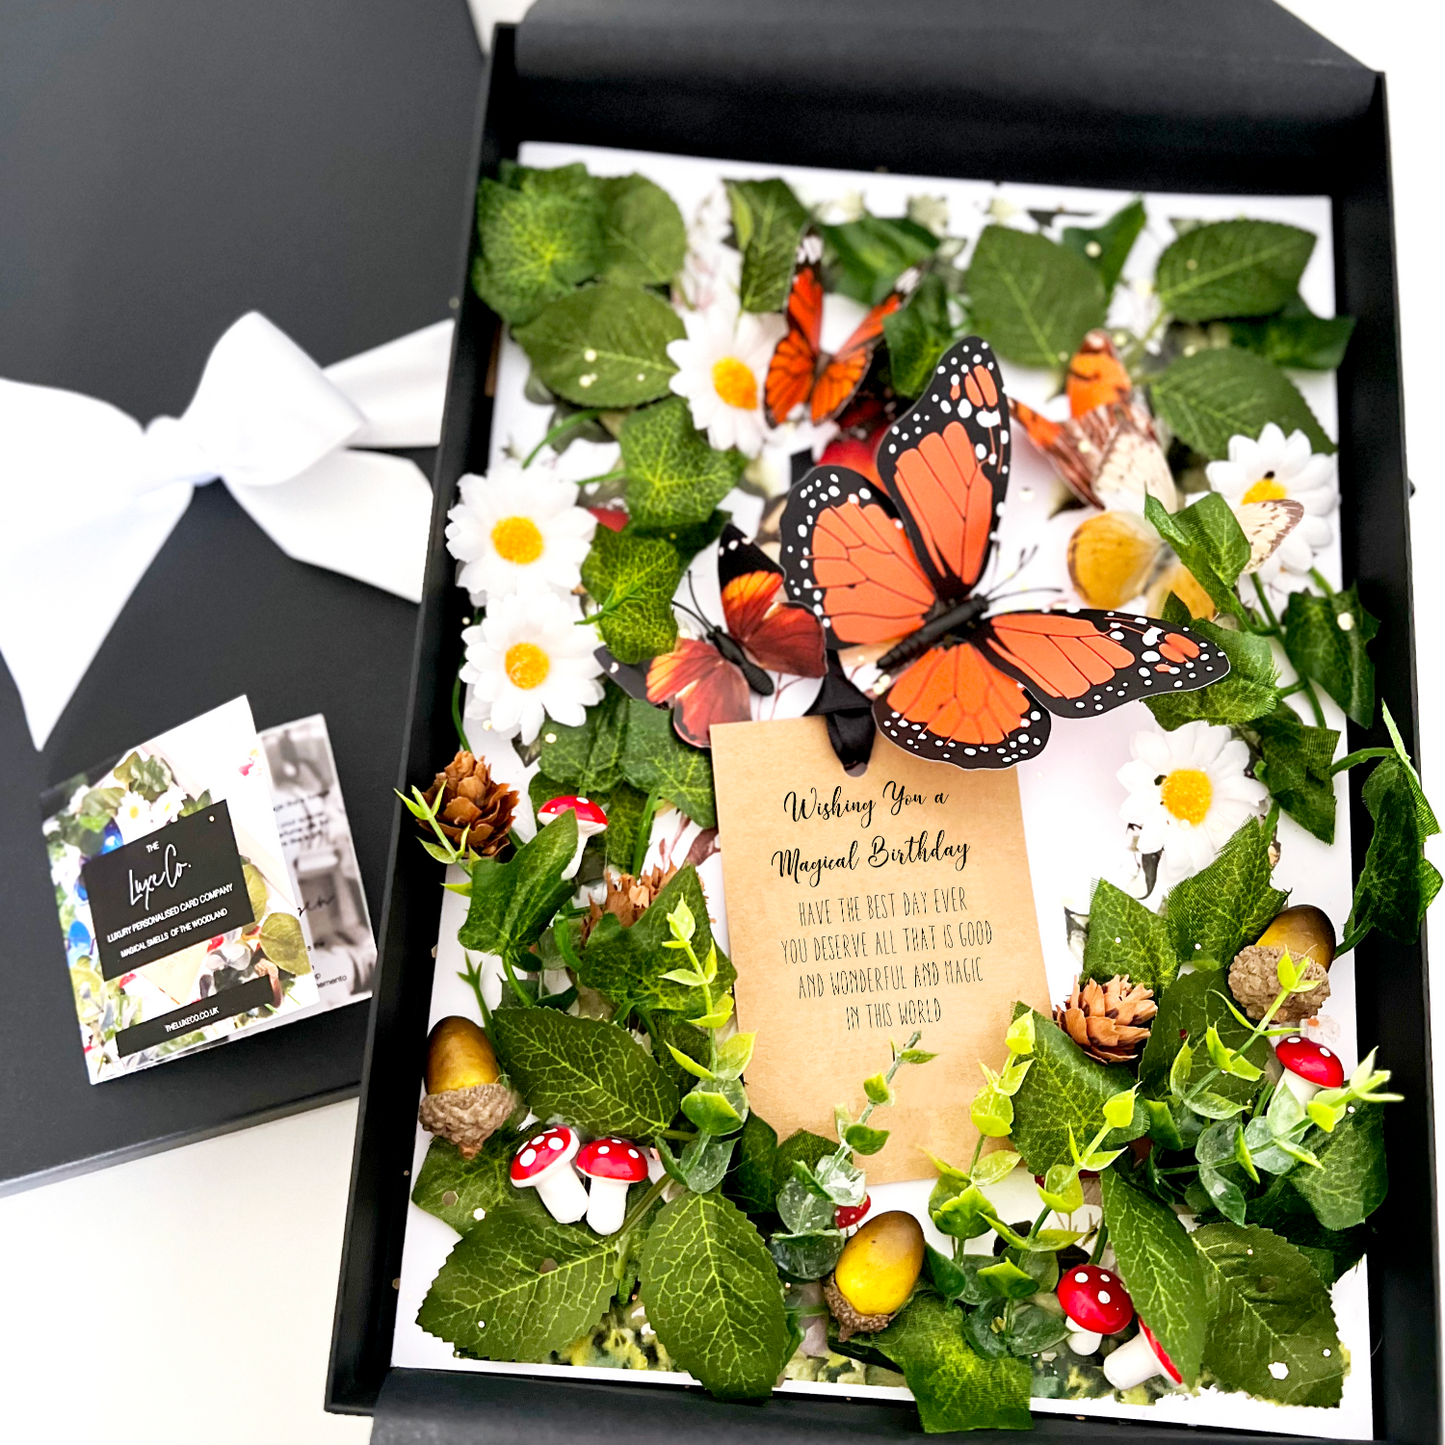 A scented butterfly woodland 3D pop up birthday card fragranced with scents of the wood, greenery & flowers